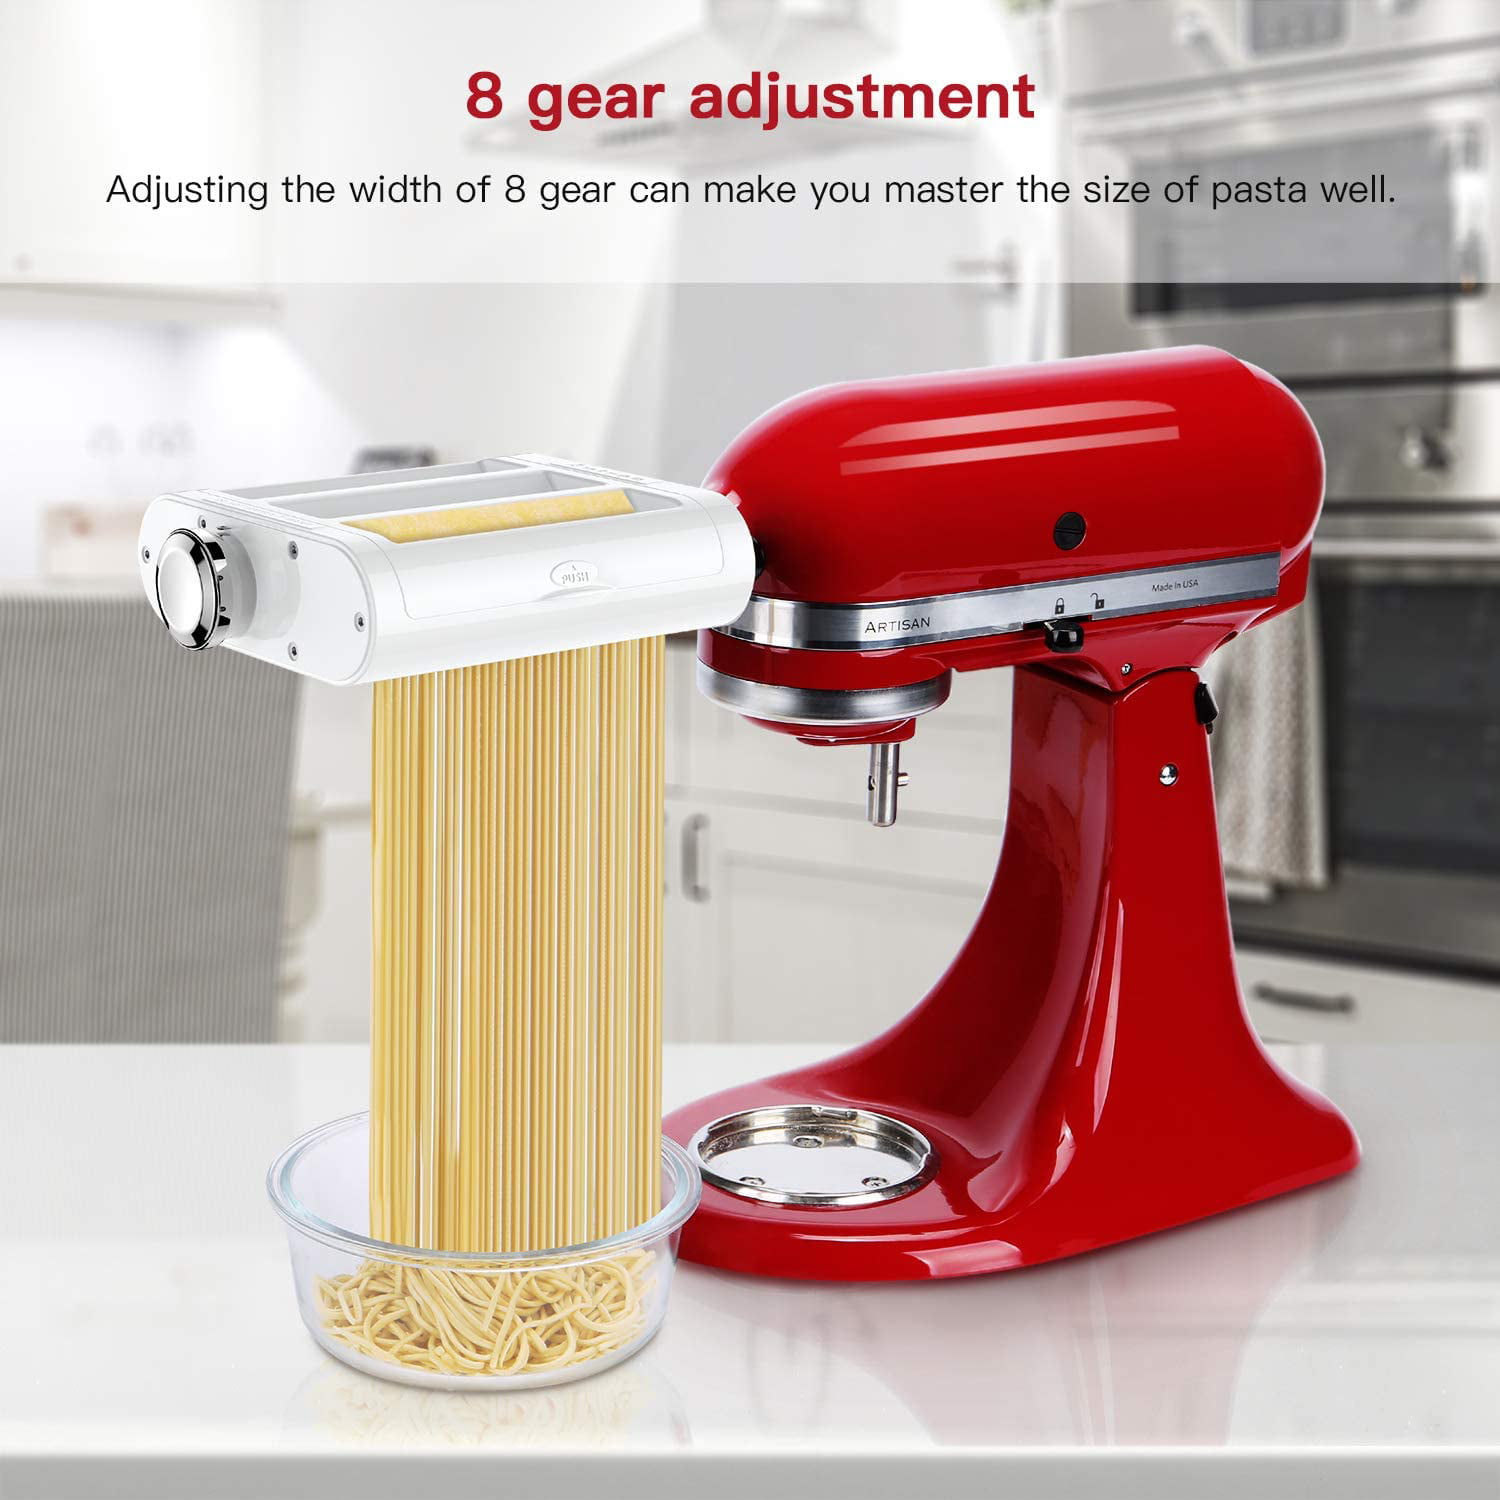 ANTREE 3 in 1 Roller & Cutters Attachment Set For KitchenAid Stand Mixers  Included Pasta Sheet Roller, Spaghetti, Fettuccine Cutter Maker, Cleaning  Brush & Pasta Drying Rack 